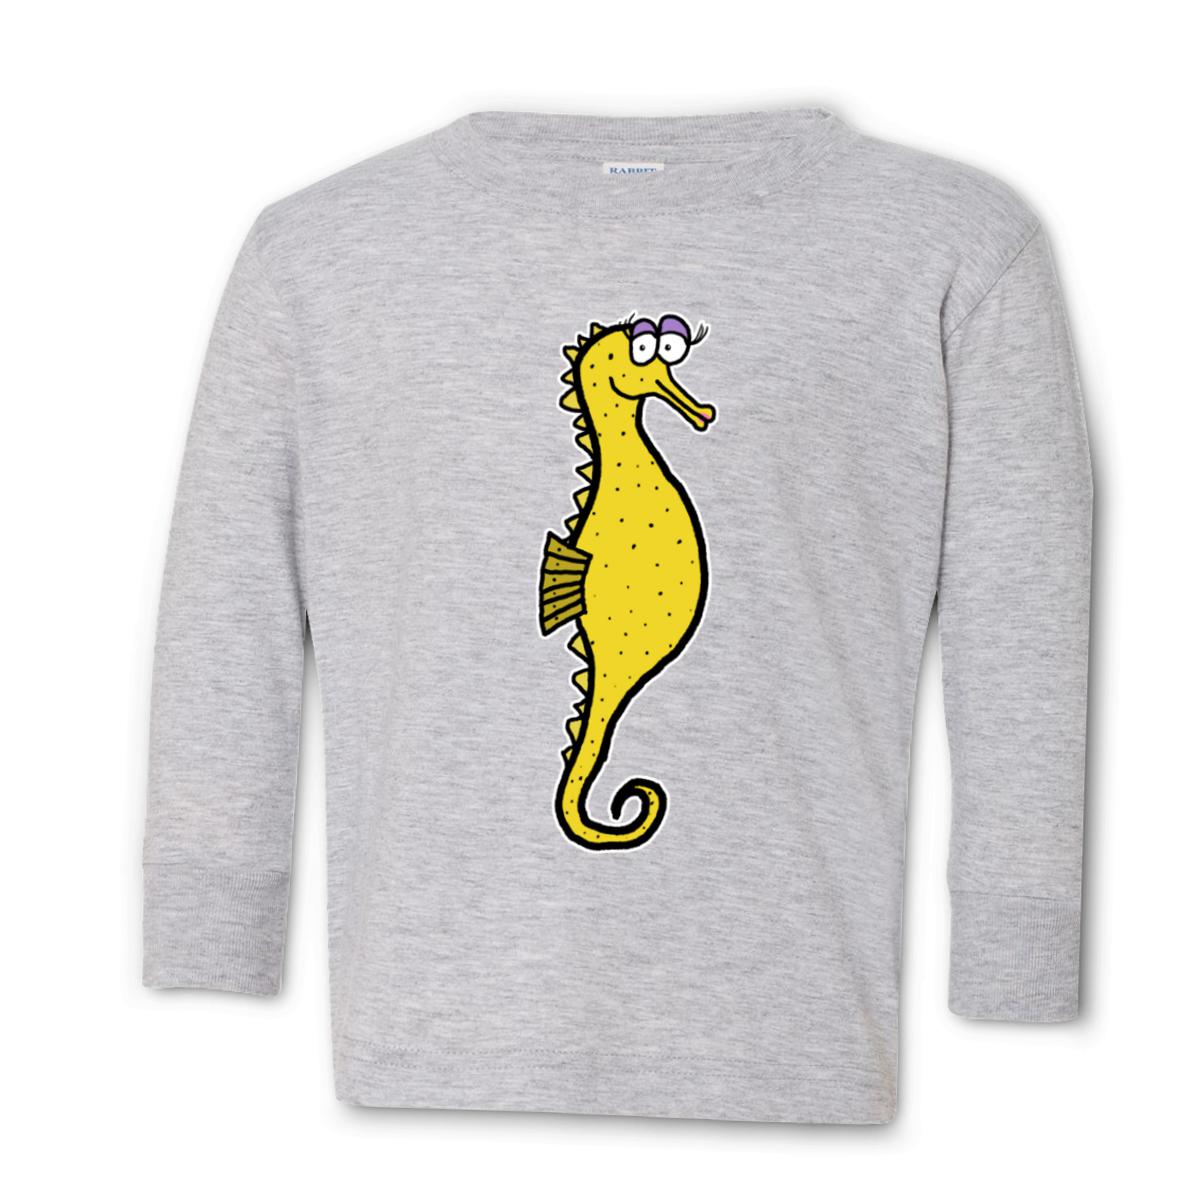 Seahorse Toddler Long Sleeve Tee 4T heather